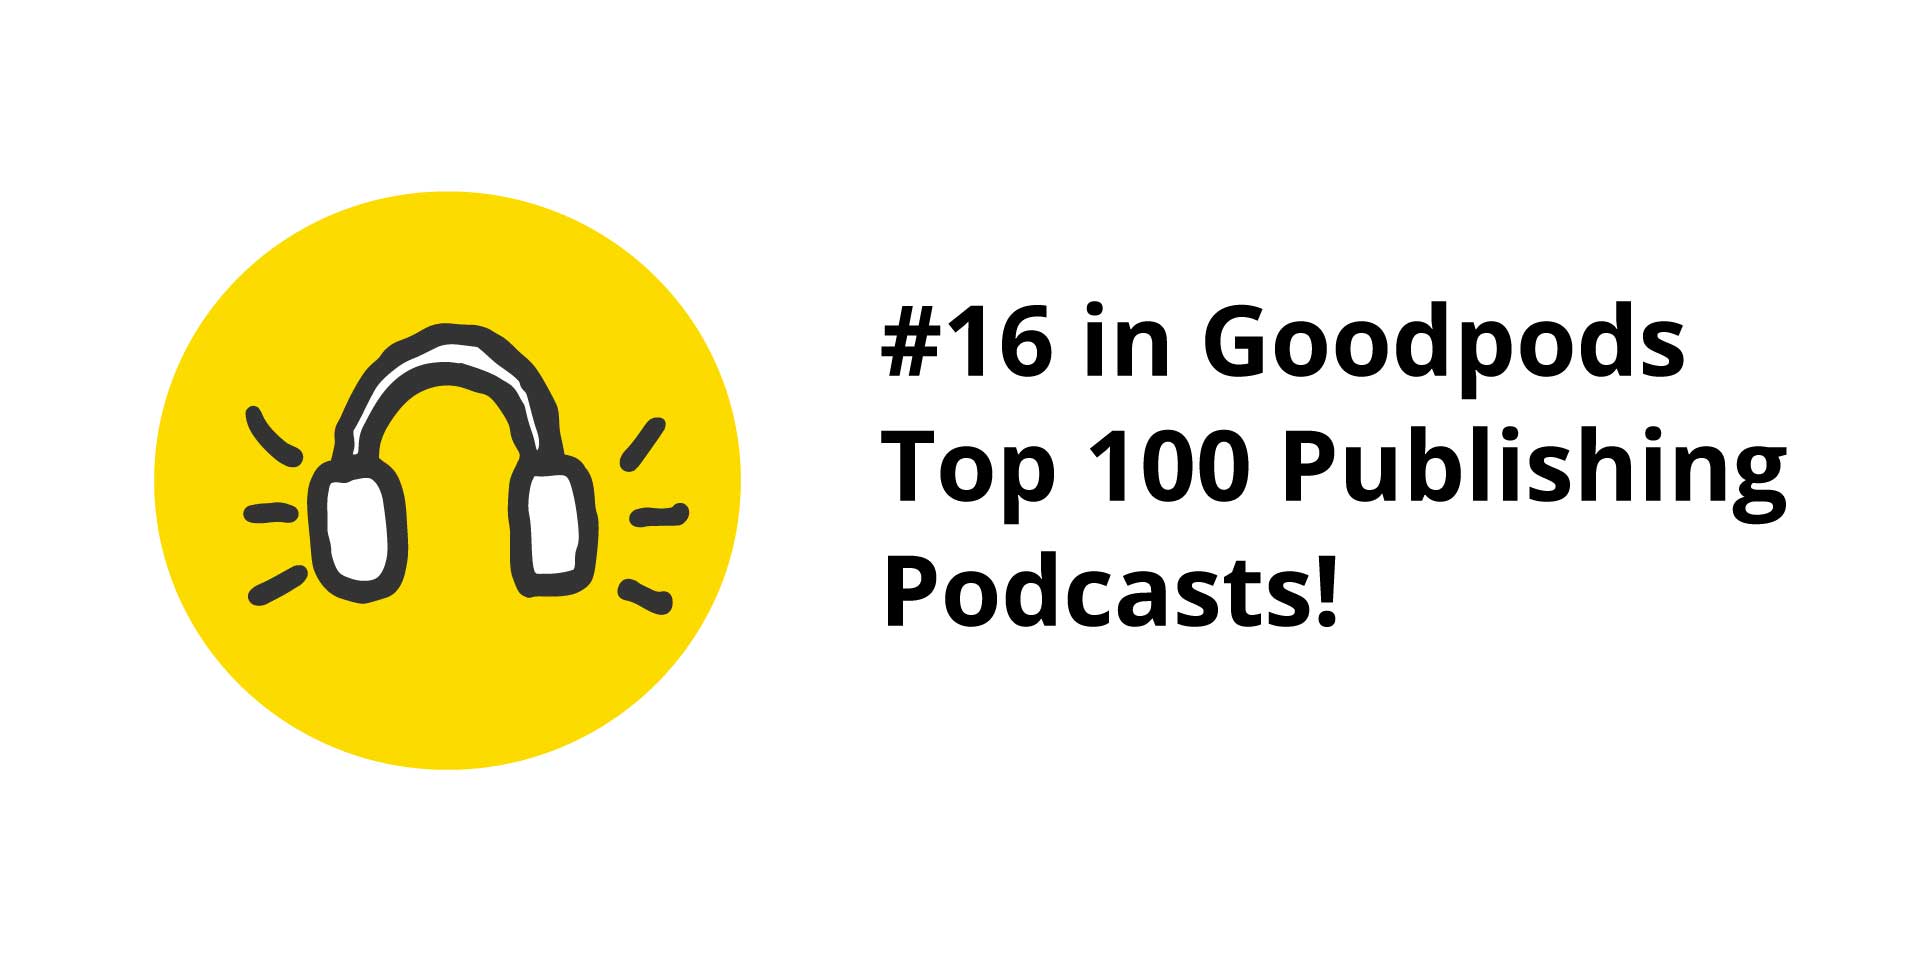 #16 in Goodpods Top 100 Publishing Podcasts!